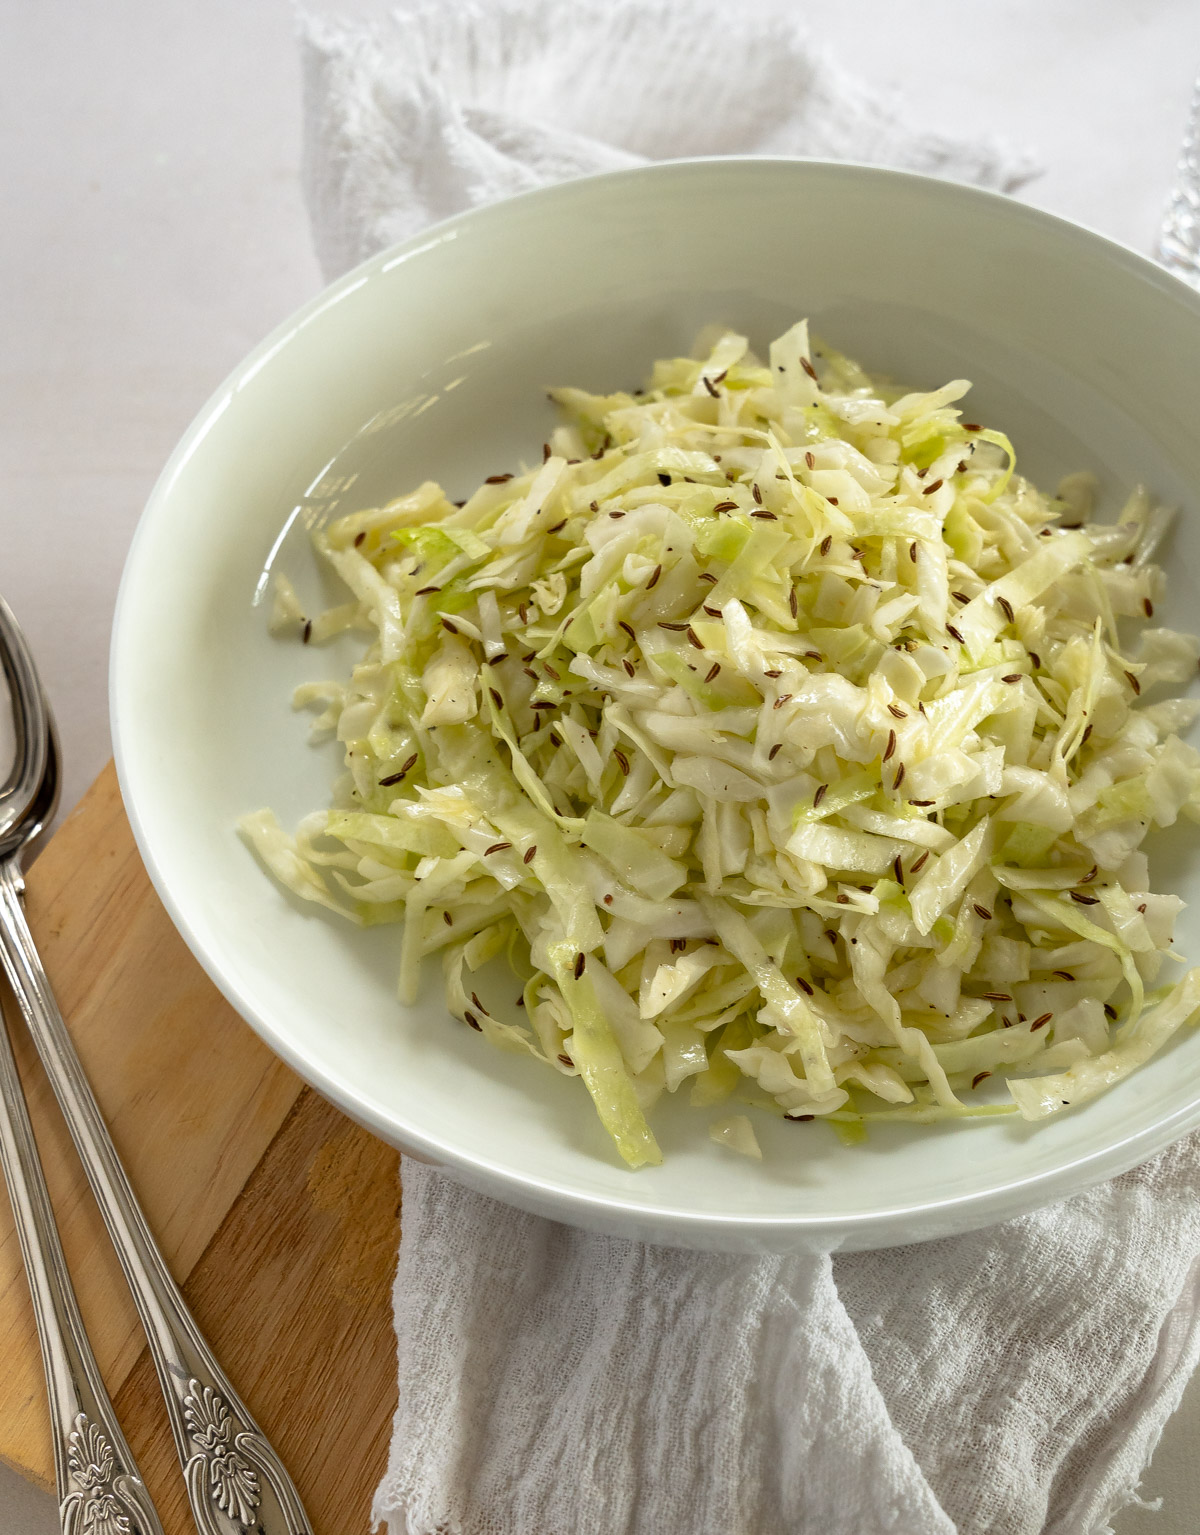 shredded white cabbage salad in a bowl